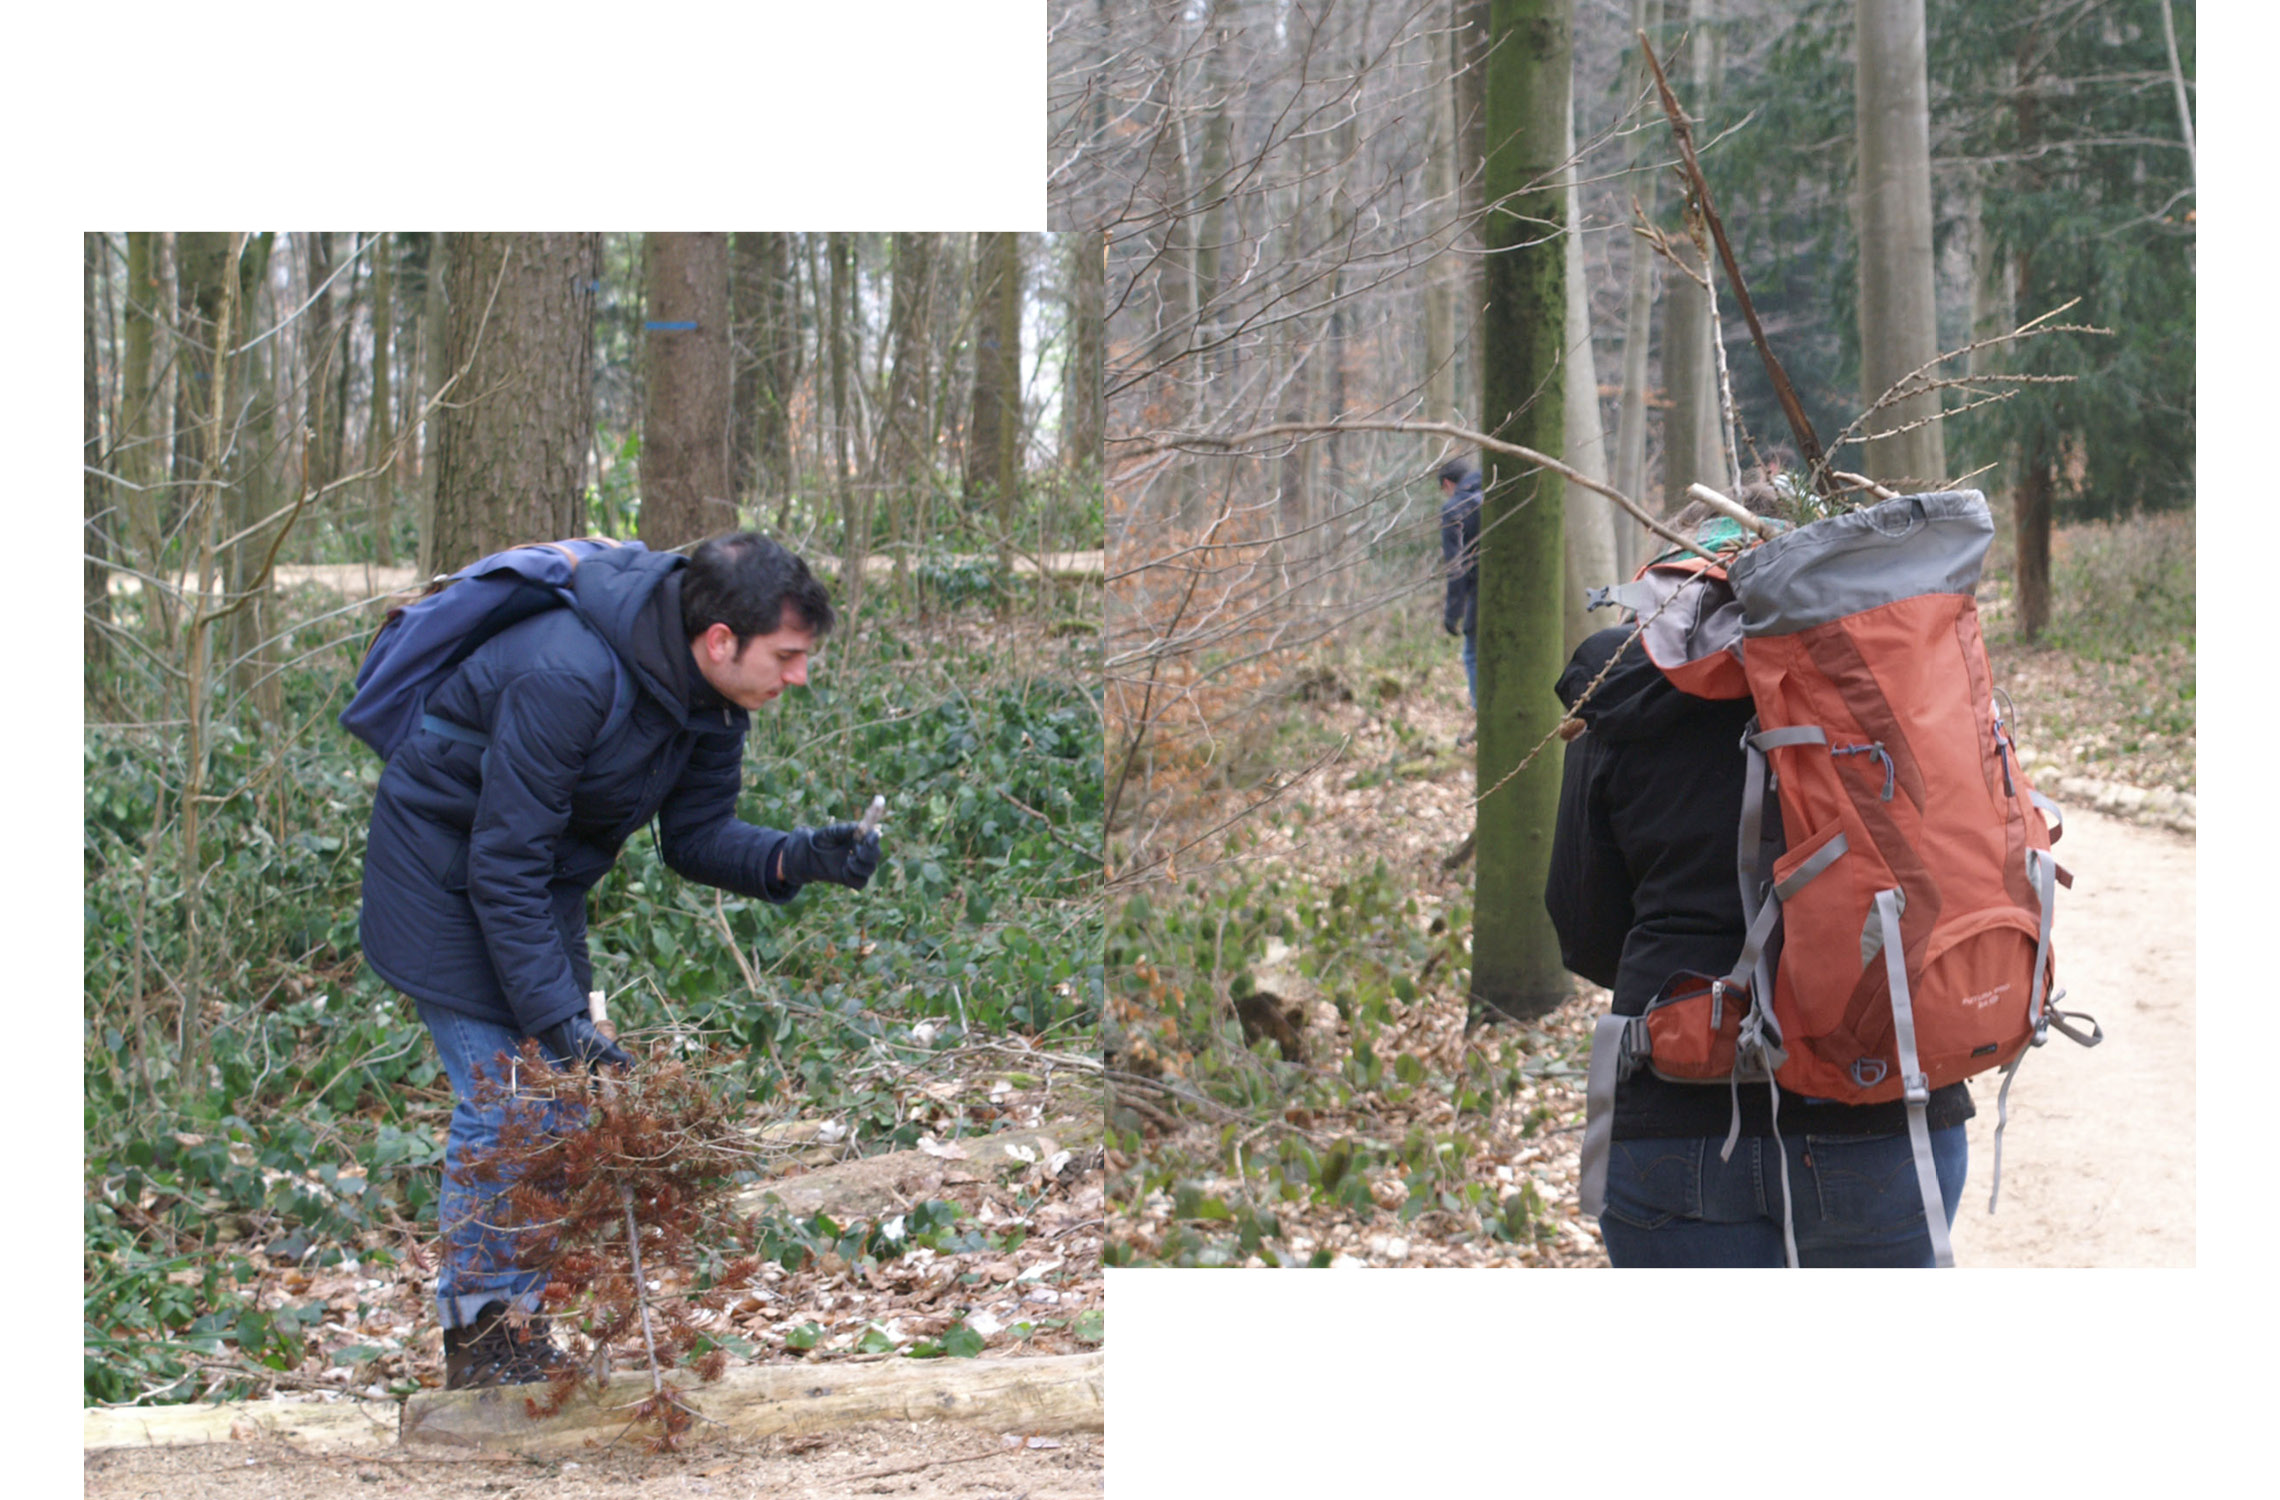 Participants collecting pieces of nature in the forest